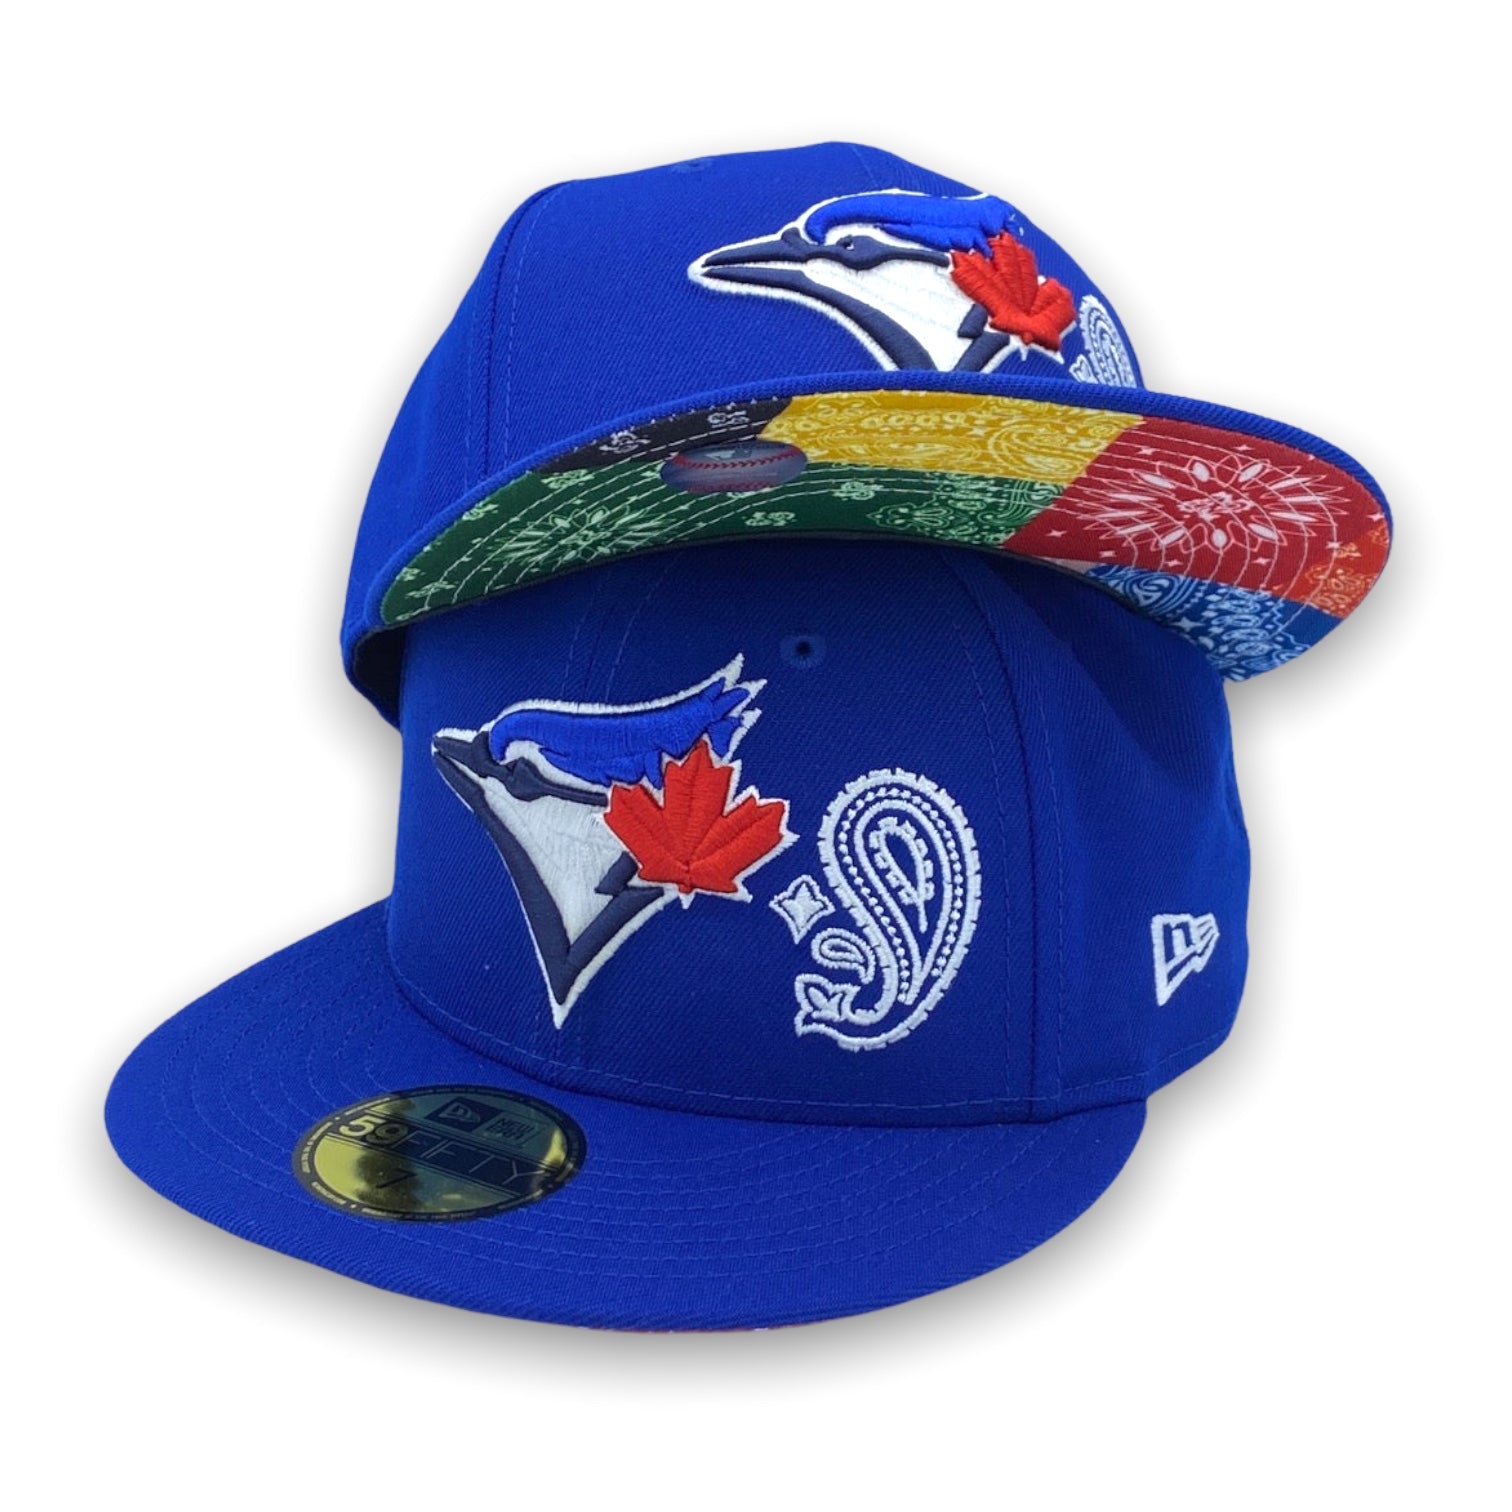 Robson Sports - Blue Jays Canada Day Hats! Available in 59fifty - $50  9forty - $36